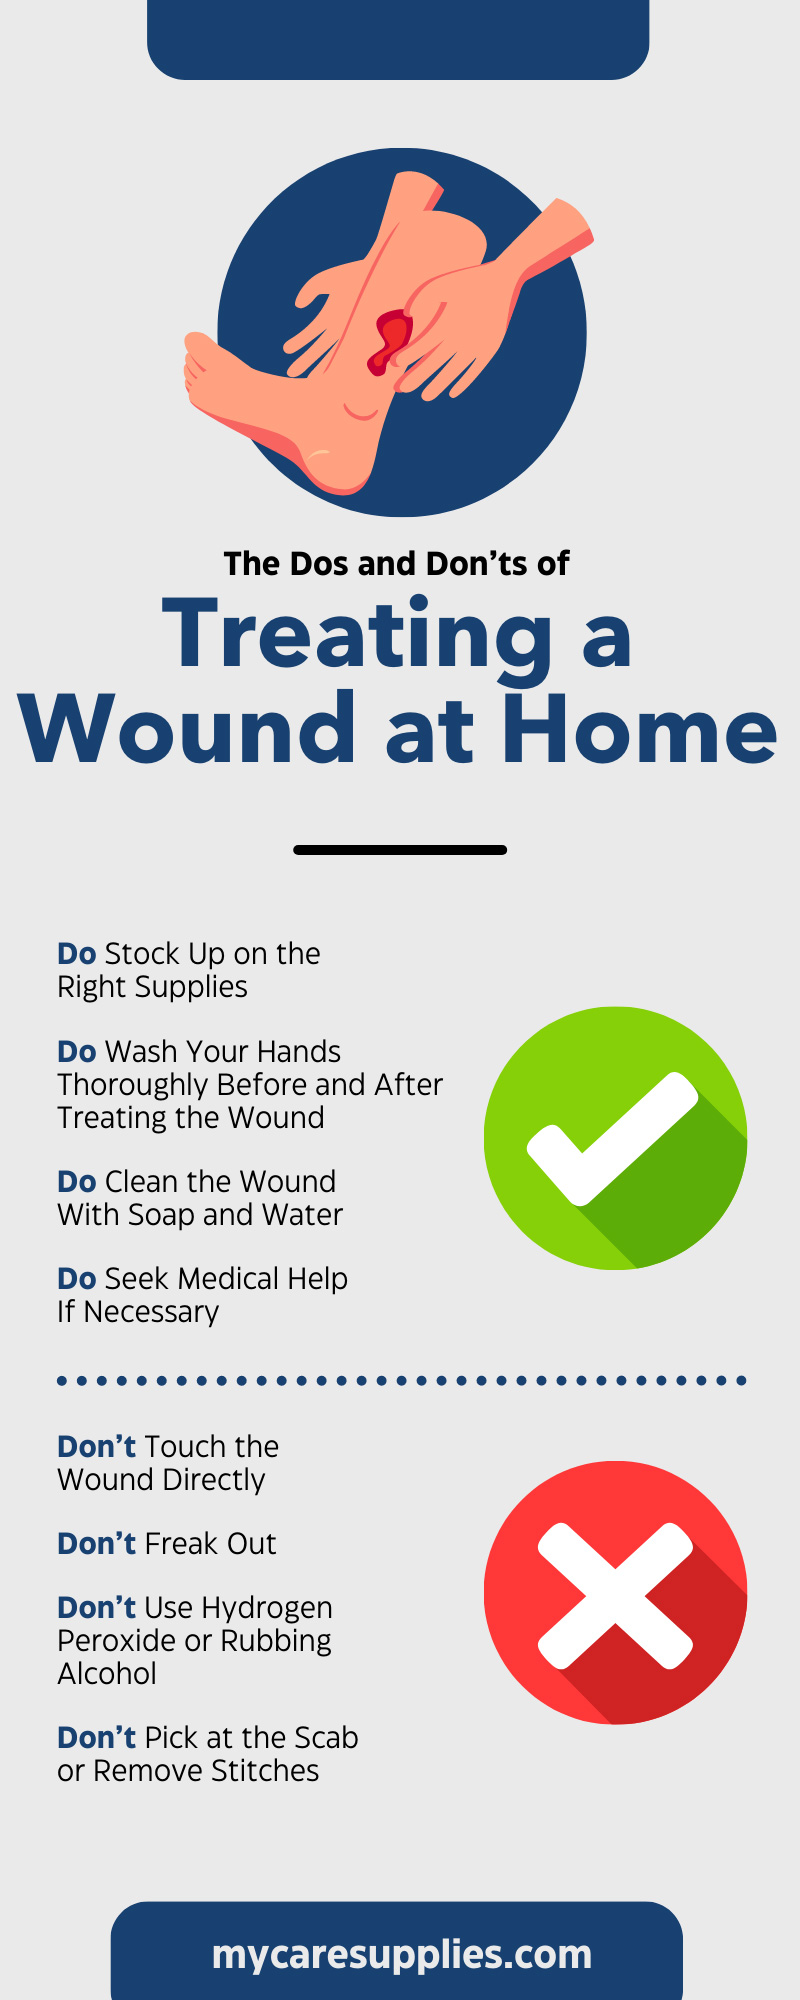 The Dos and Don’ts of Treating a Wound at Home